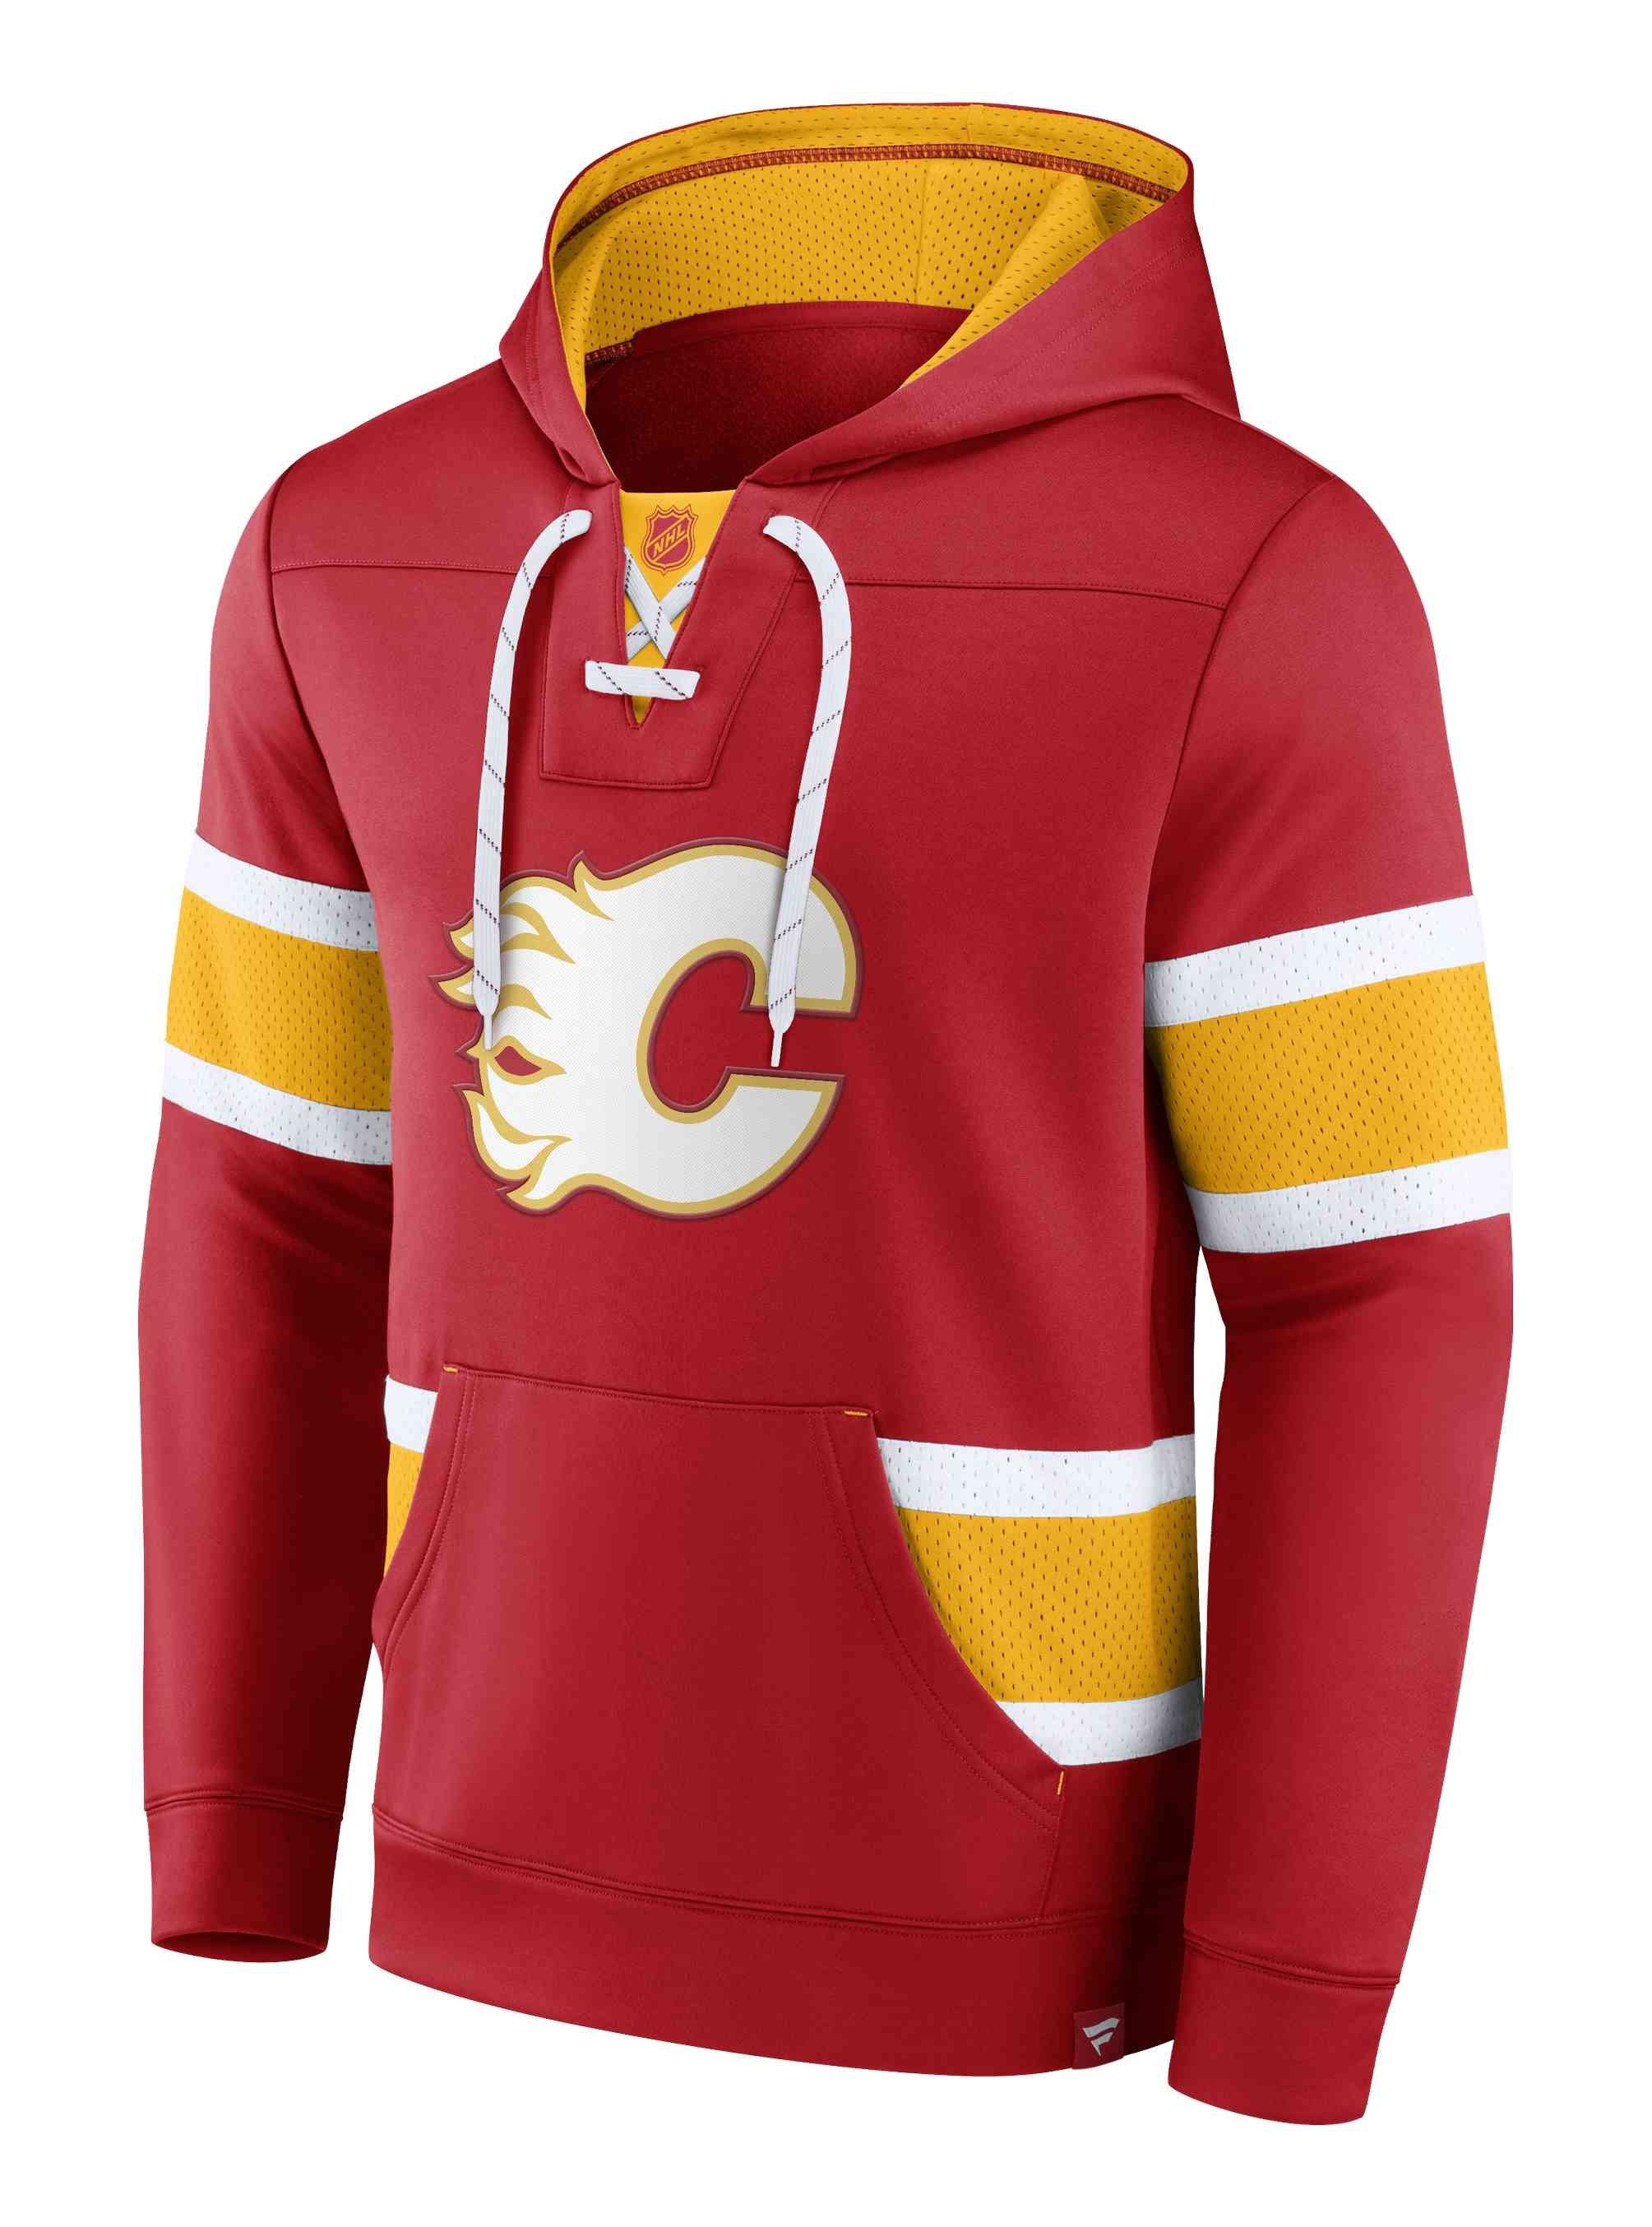 Hoodie NHL Flames Calgary Exclusive Fanatics Iconic Pullover